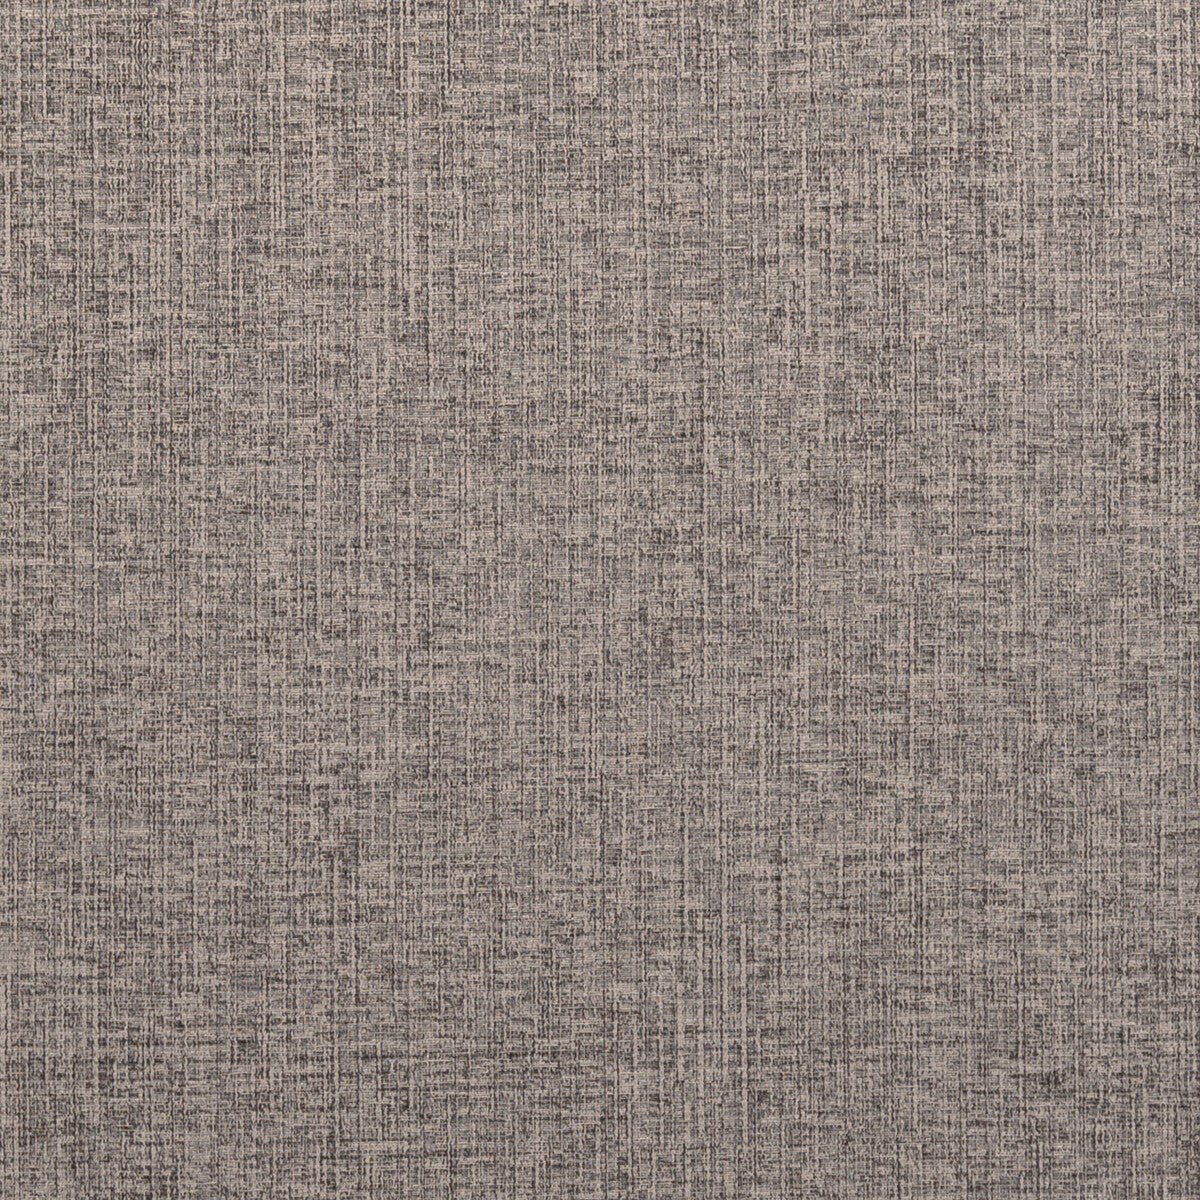 Karina fabric in grey color - pattern F0371/04.CAC.0 - by Clarke And Clarke in the Clarke &amp; Clarke Karina collection